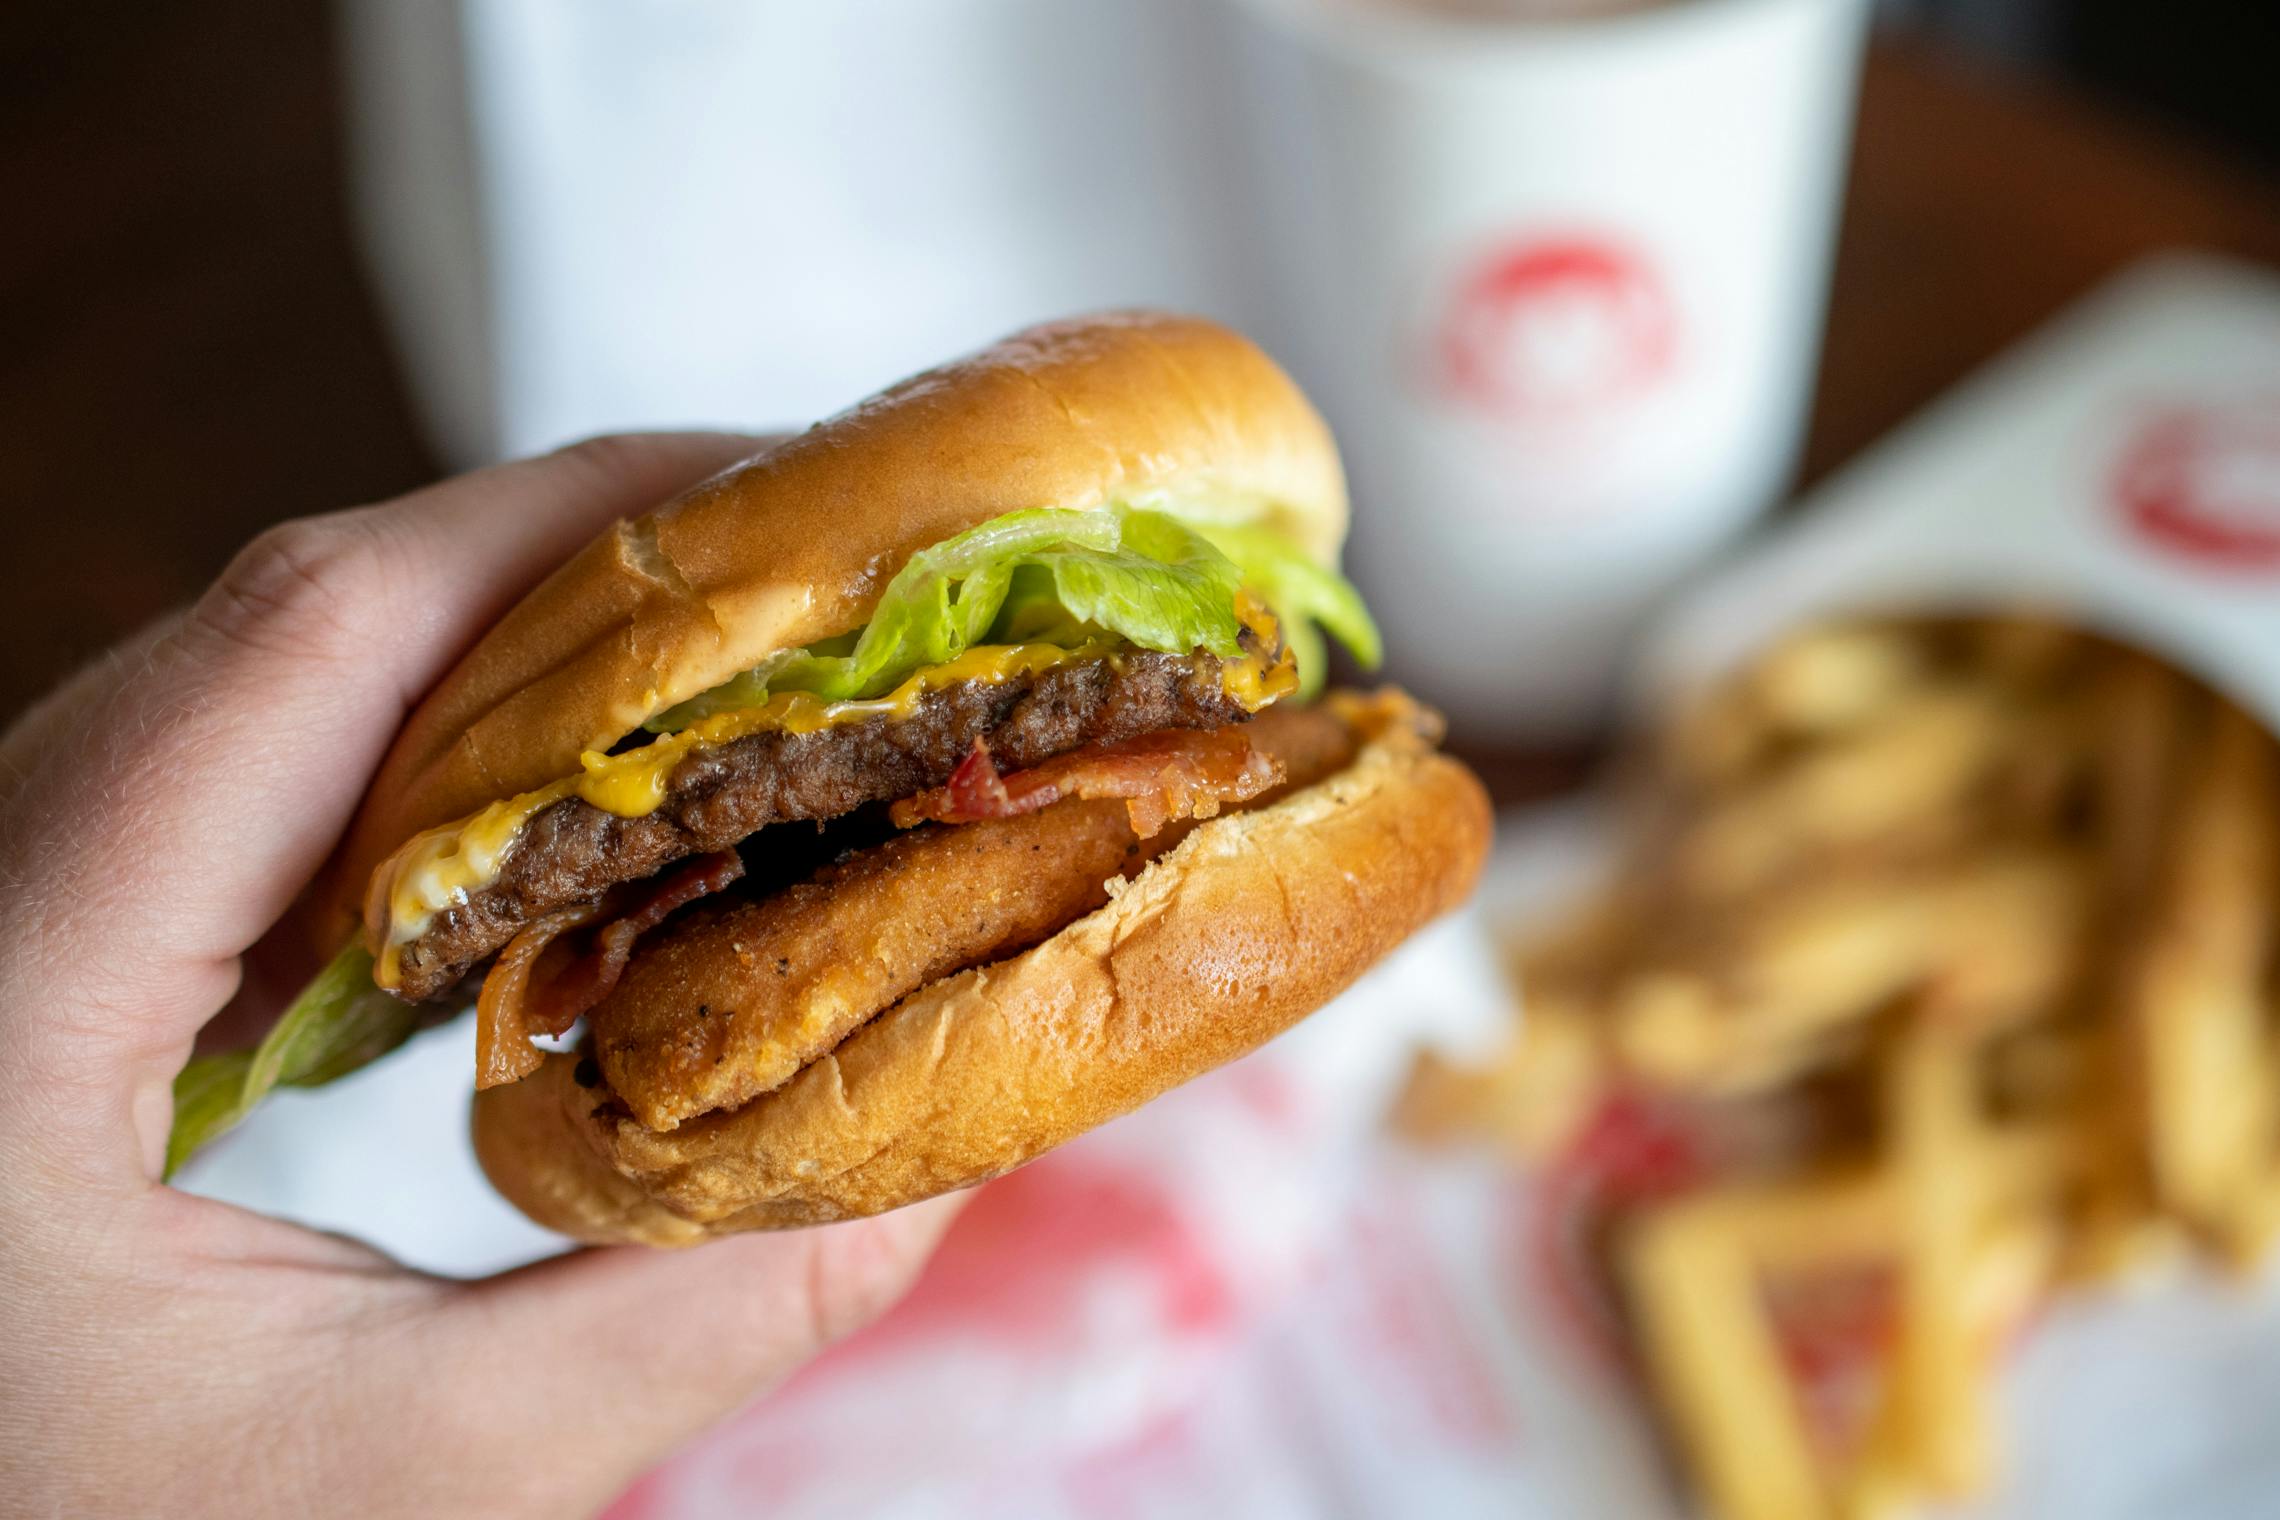 A person holding a Wendy's burger with fries and a frosty out of focus on the table in the background.